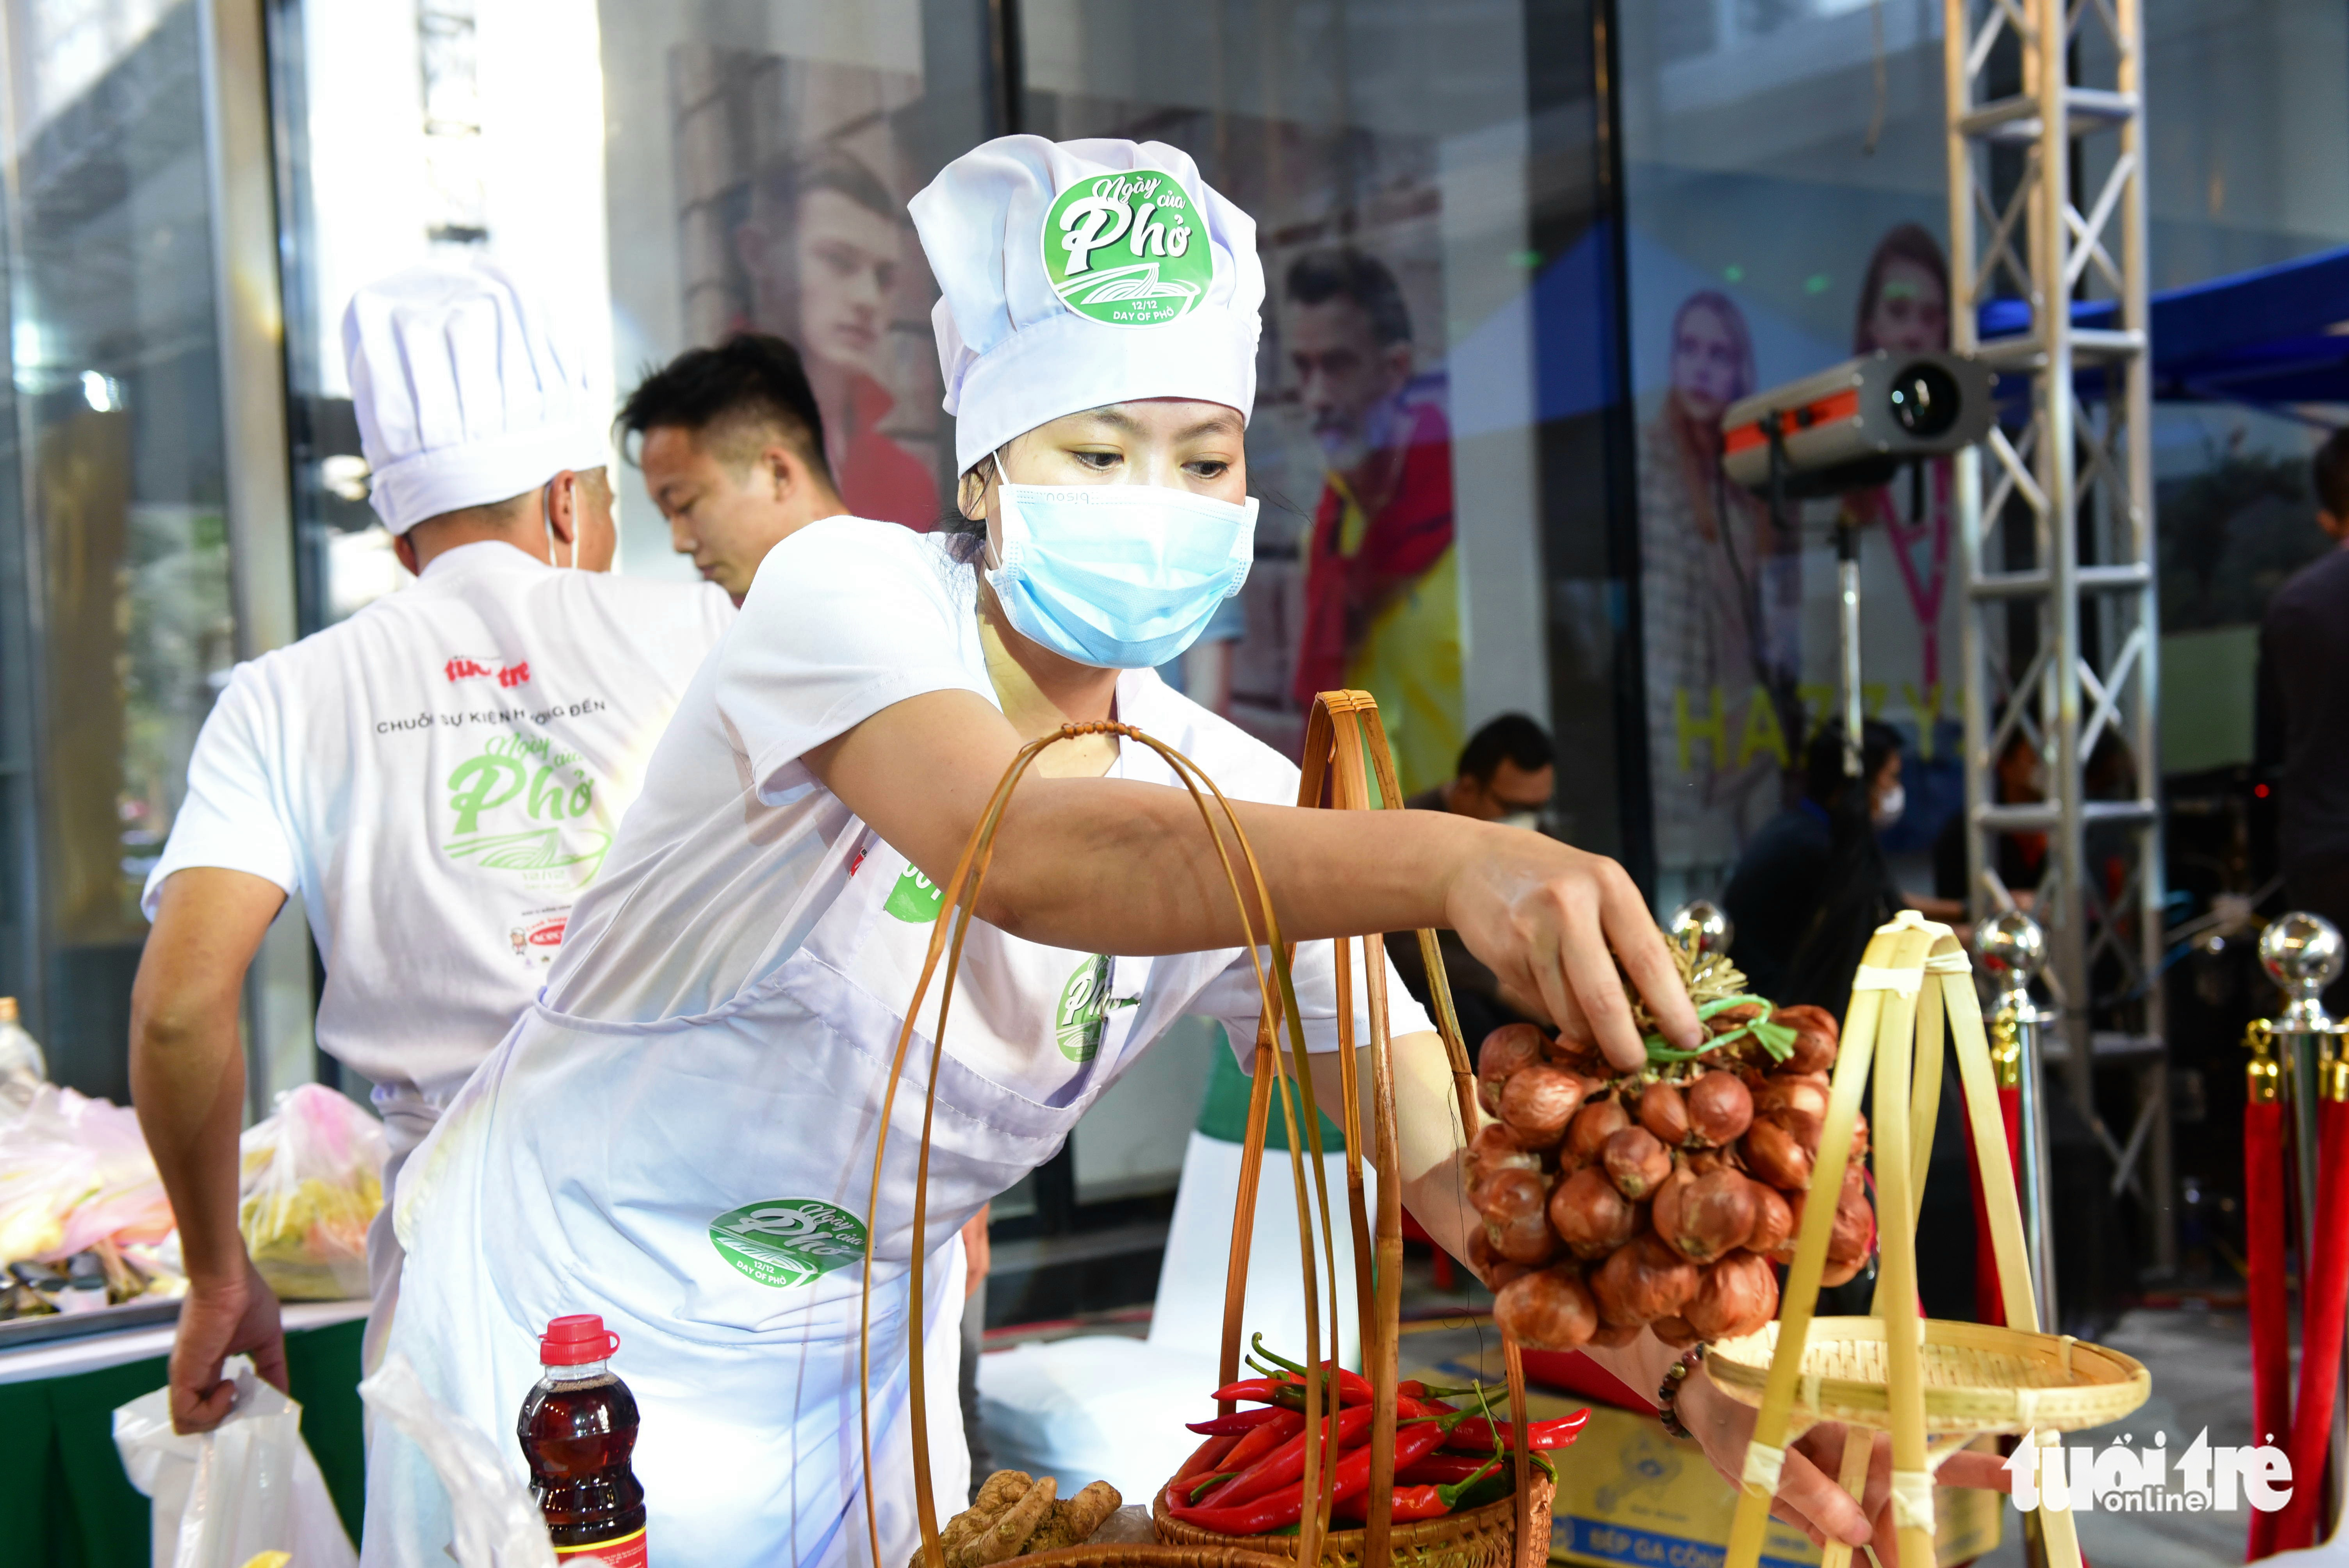 Contestants compete at a competition to search for Vietnam’s best pho chefs within the framework of the 2021 Day of Pho at Vincom Center Landmark 81 in Binh Thanh District, Ho Chi Minh City, December 12, 2021. Photo: Tuoi Tre